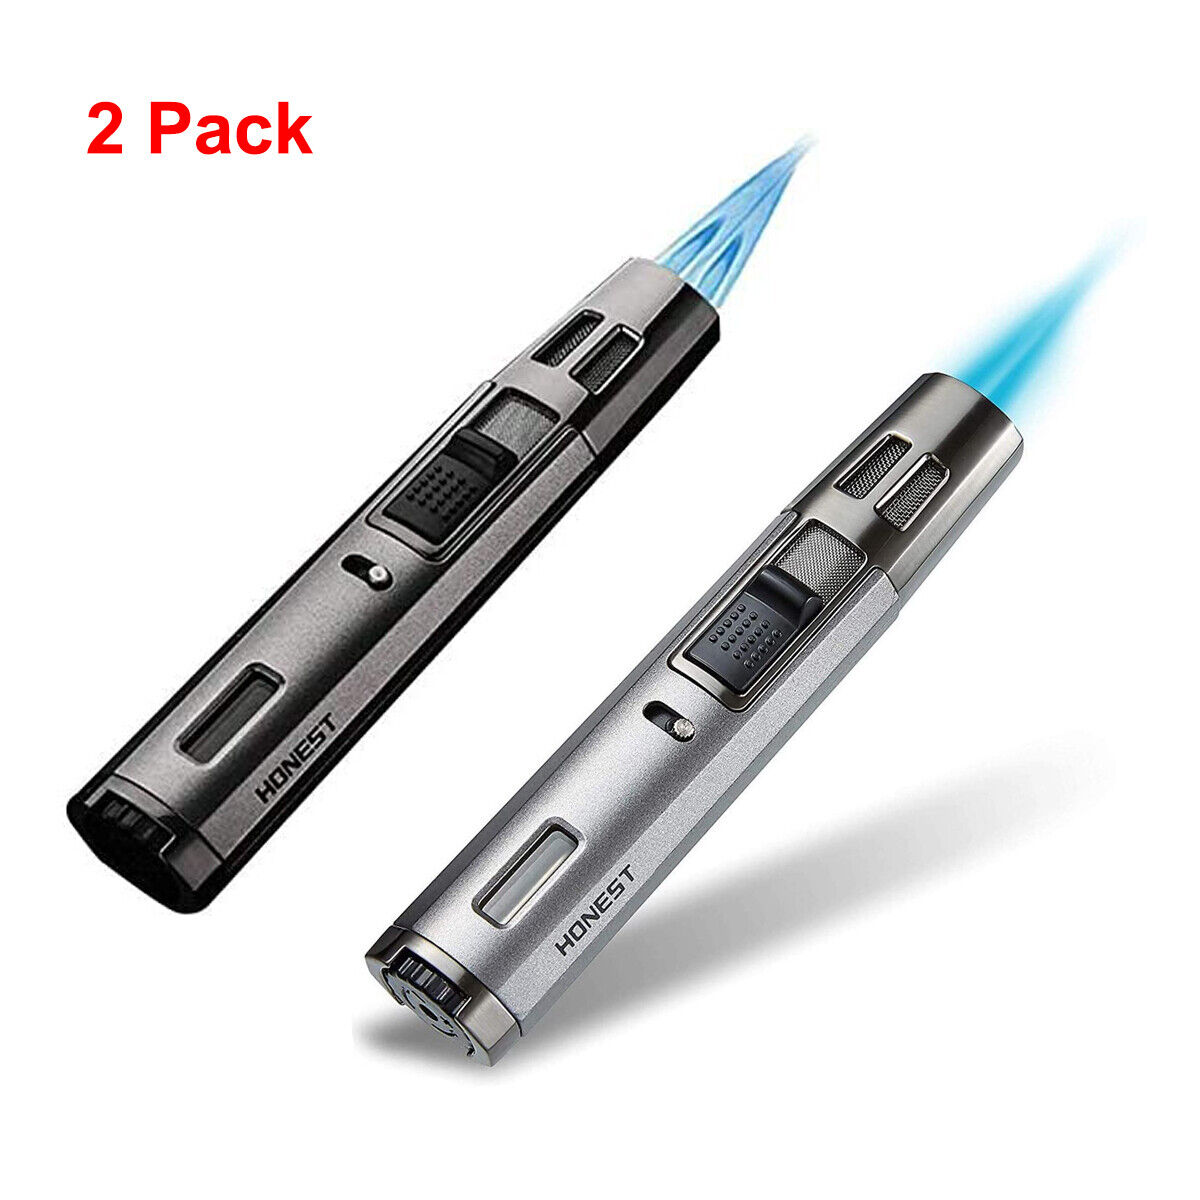 2 PACK Refillable Lighter Adjustable Torch Lighter for Cooking BBQ Double Flame